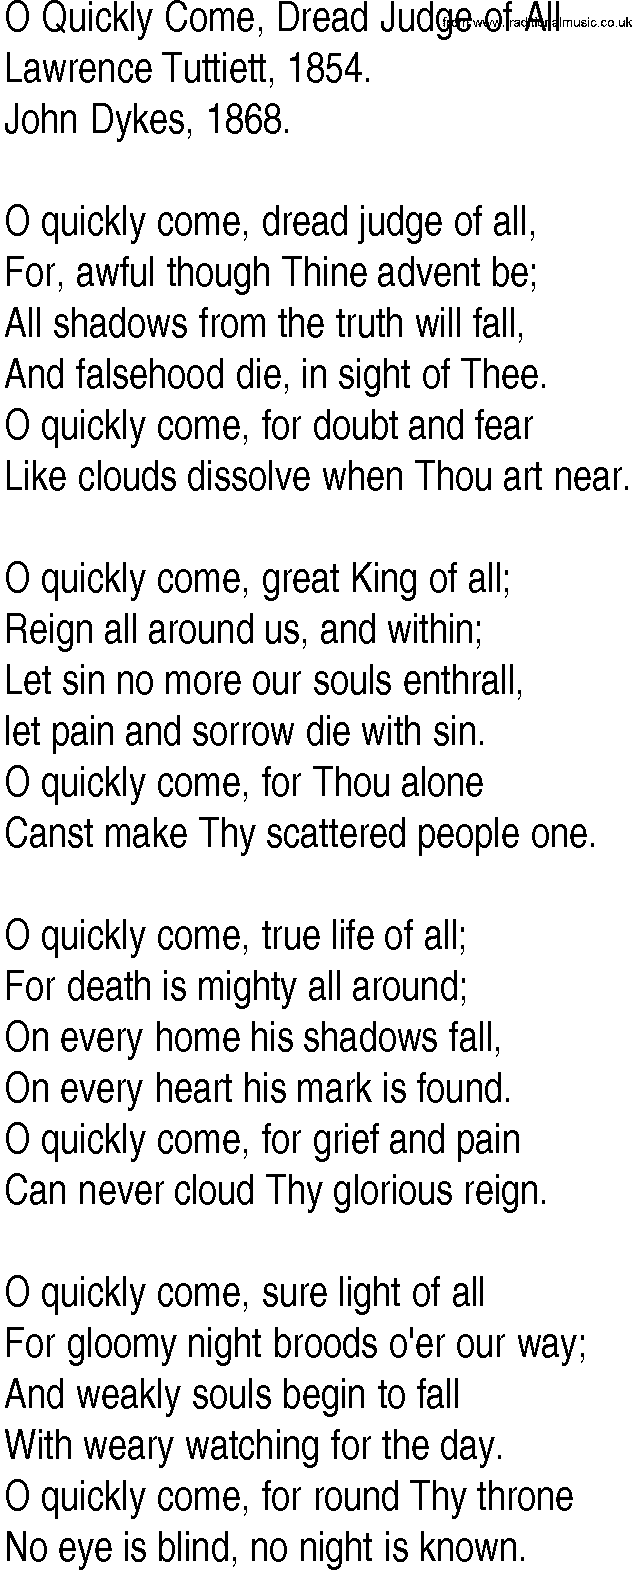 Hymn and Gospel Song: O Quickly Come, Dread Judge of All by Lawrence Tuttiett lyrics